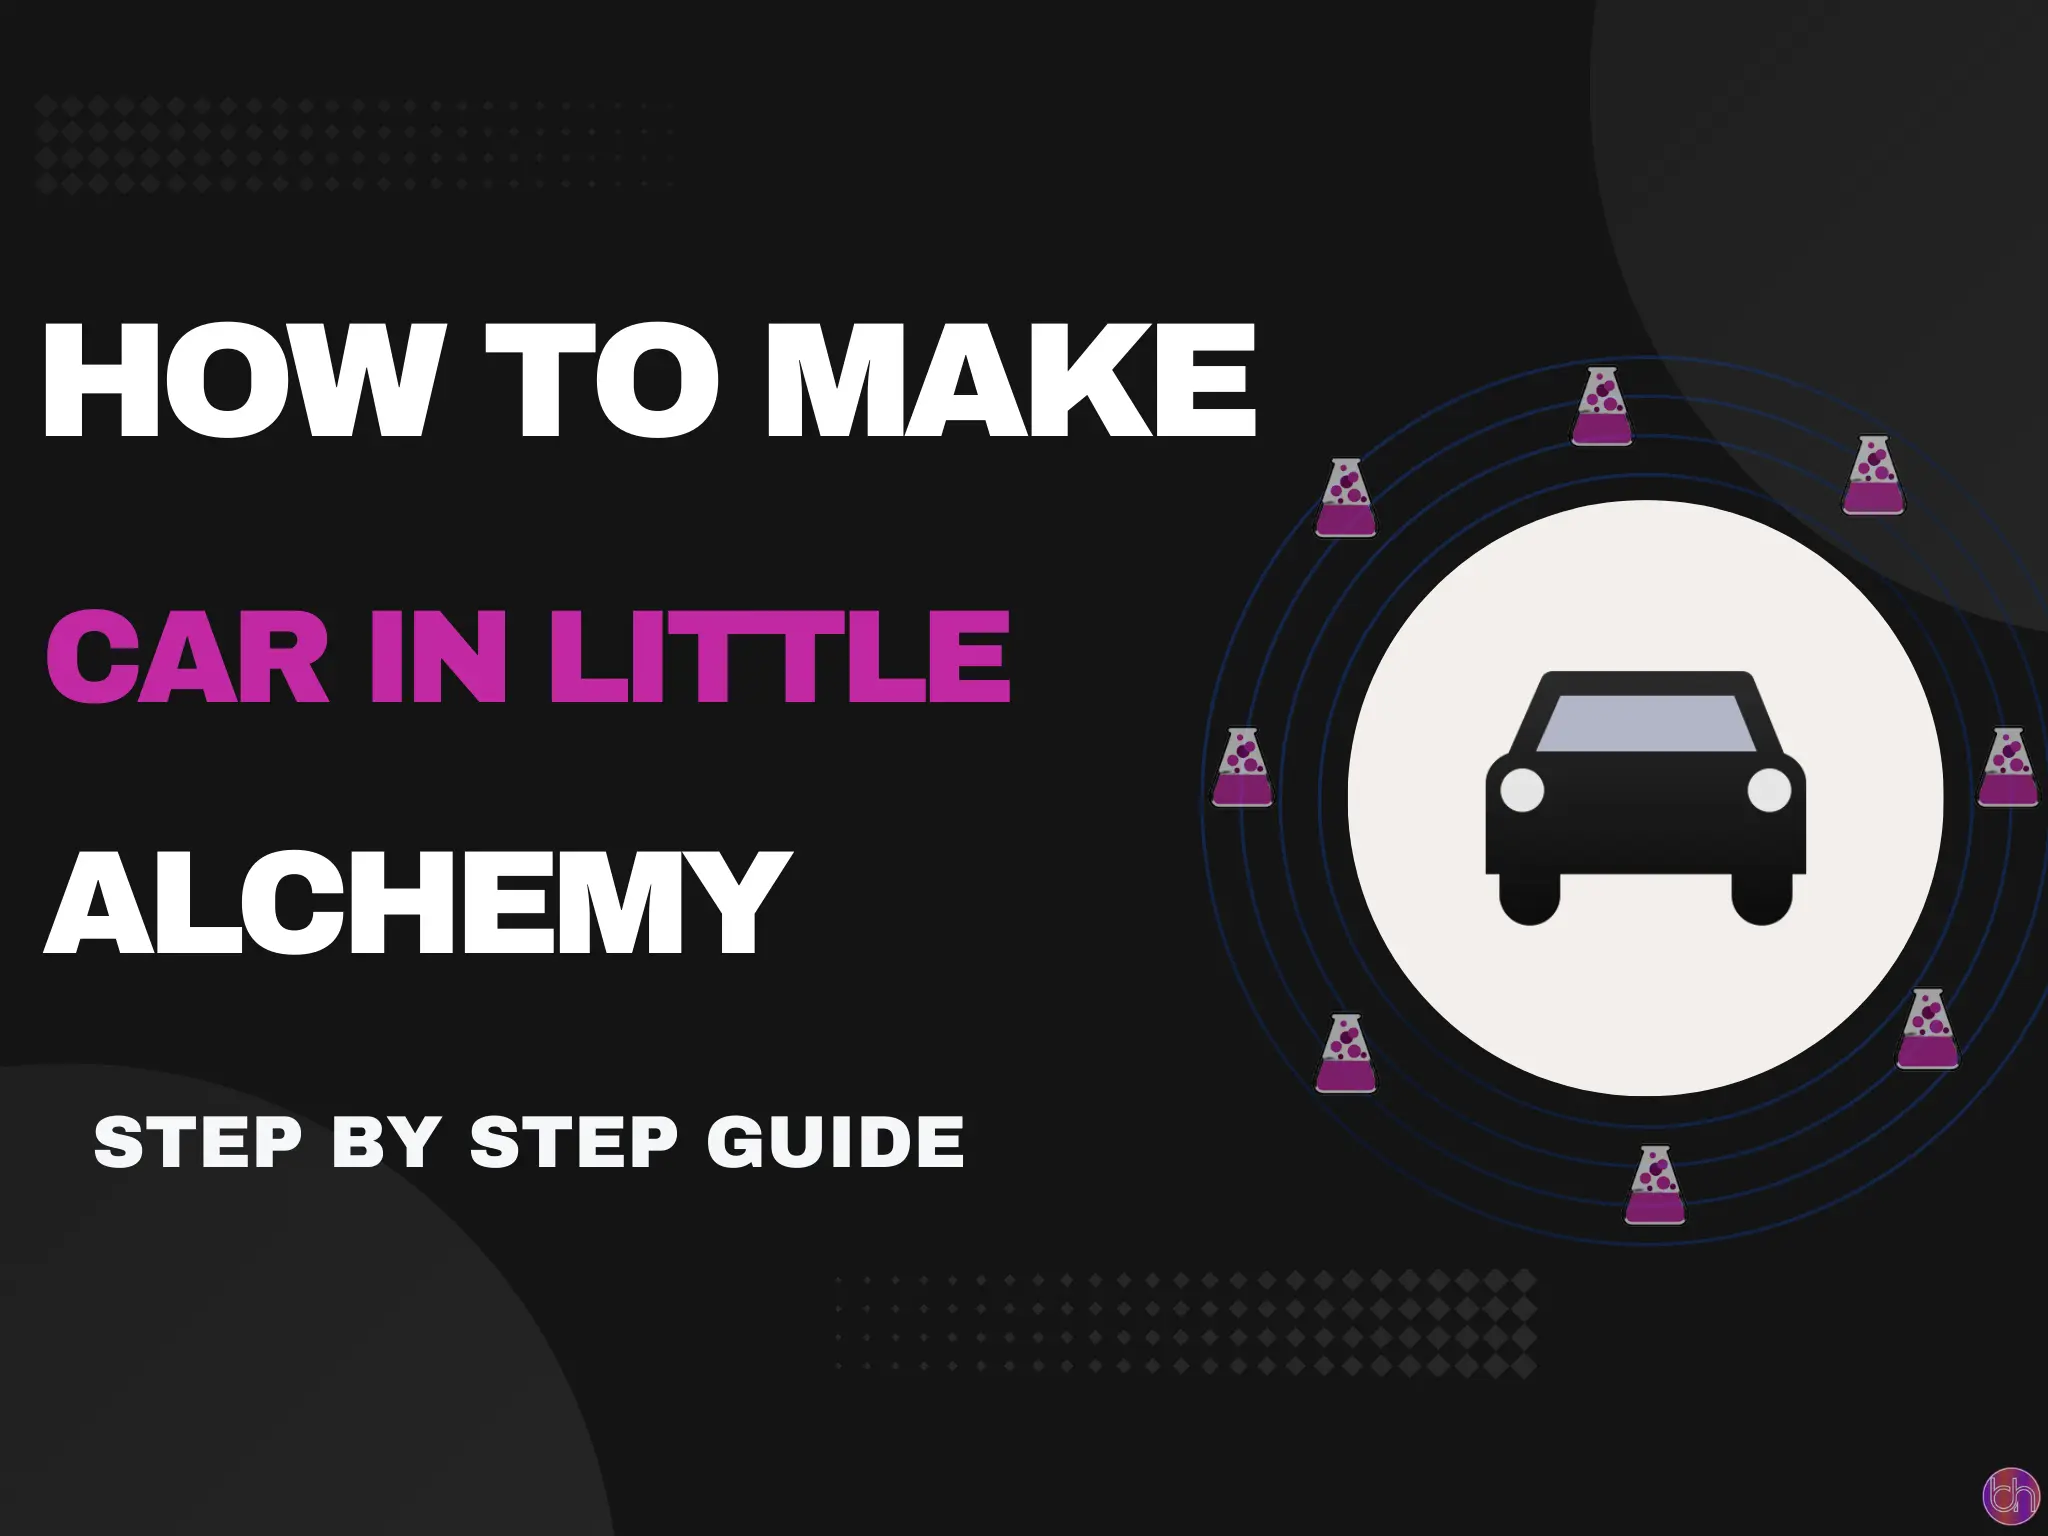 How to make Car in little alchemy